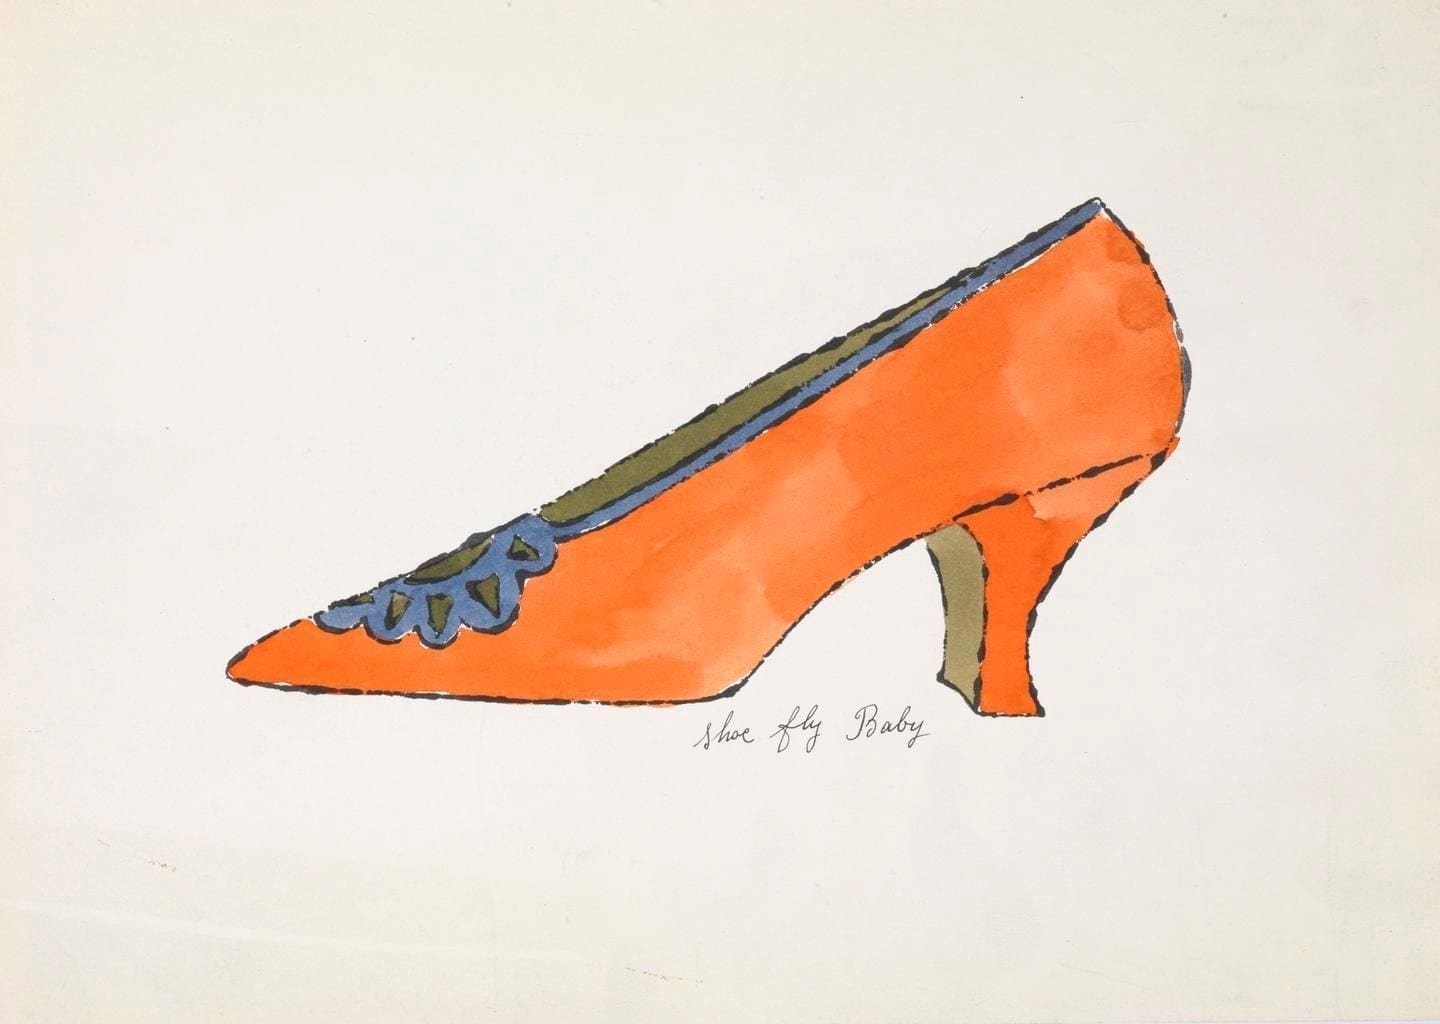 Shoe Fly Baby, 1955